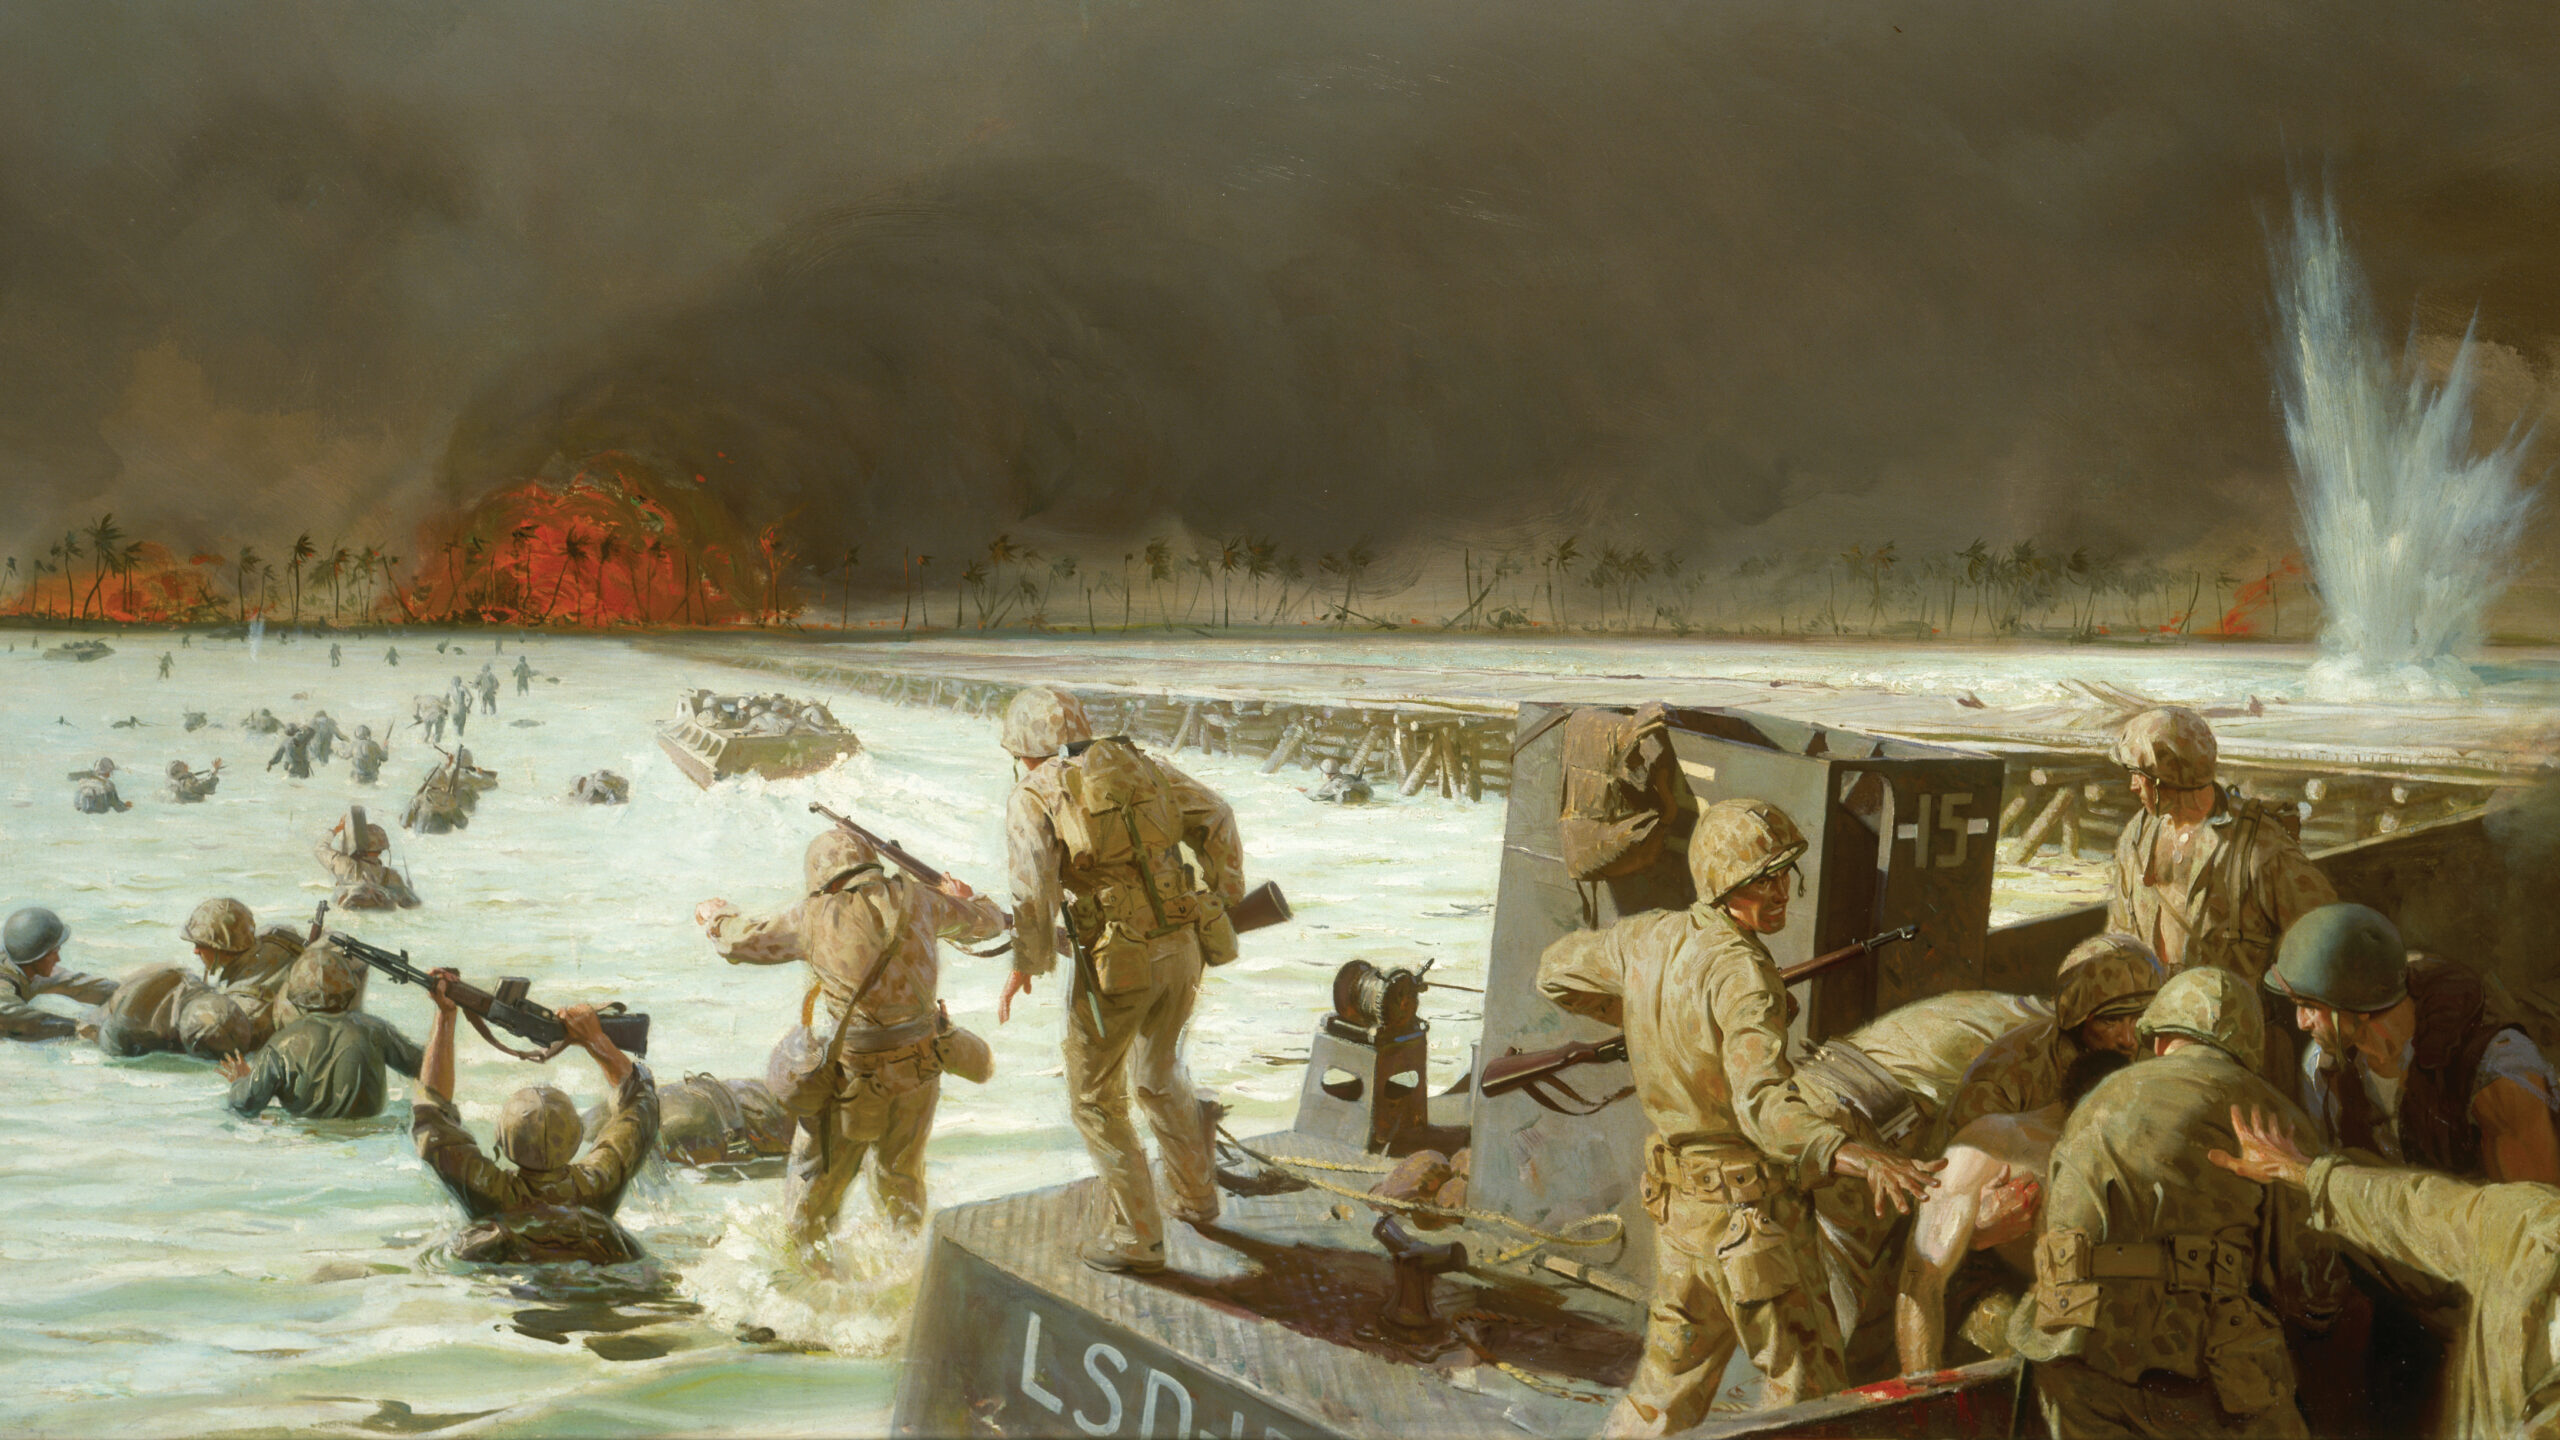 Under a smoke-blackened sky, U.S. Marines, in their distinctive P42 camouflage uniforms, wade across the shallow lagoon toward the blazing Tarawa beachhead in the Gilbert Islands (now Kiribati), November 20, 1943. The draft of the Higgins boats proved too great for the shallow water that covered the barrier reef encircling the lagoon, forcing many Marines to struggle ashore through heavy enemy fire. Painting by artist and U.S.M.C. Sergeant Tom Lovell.